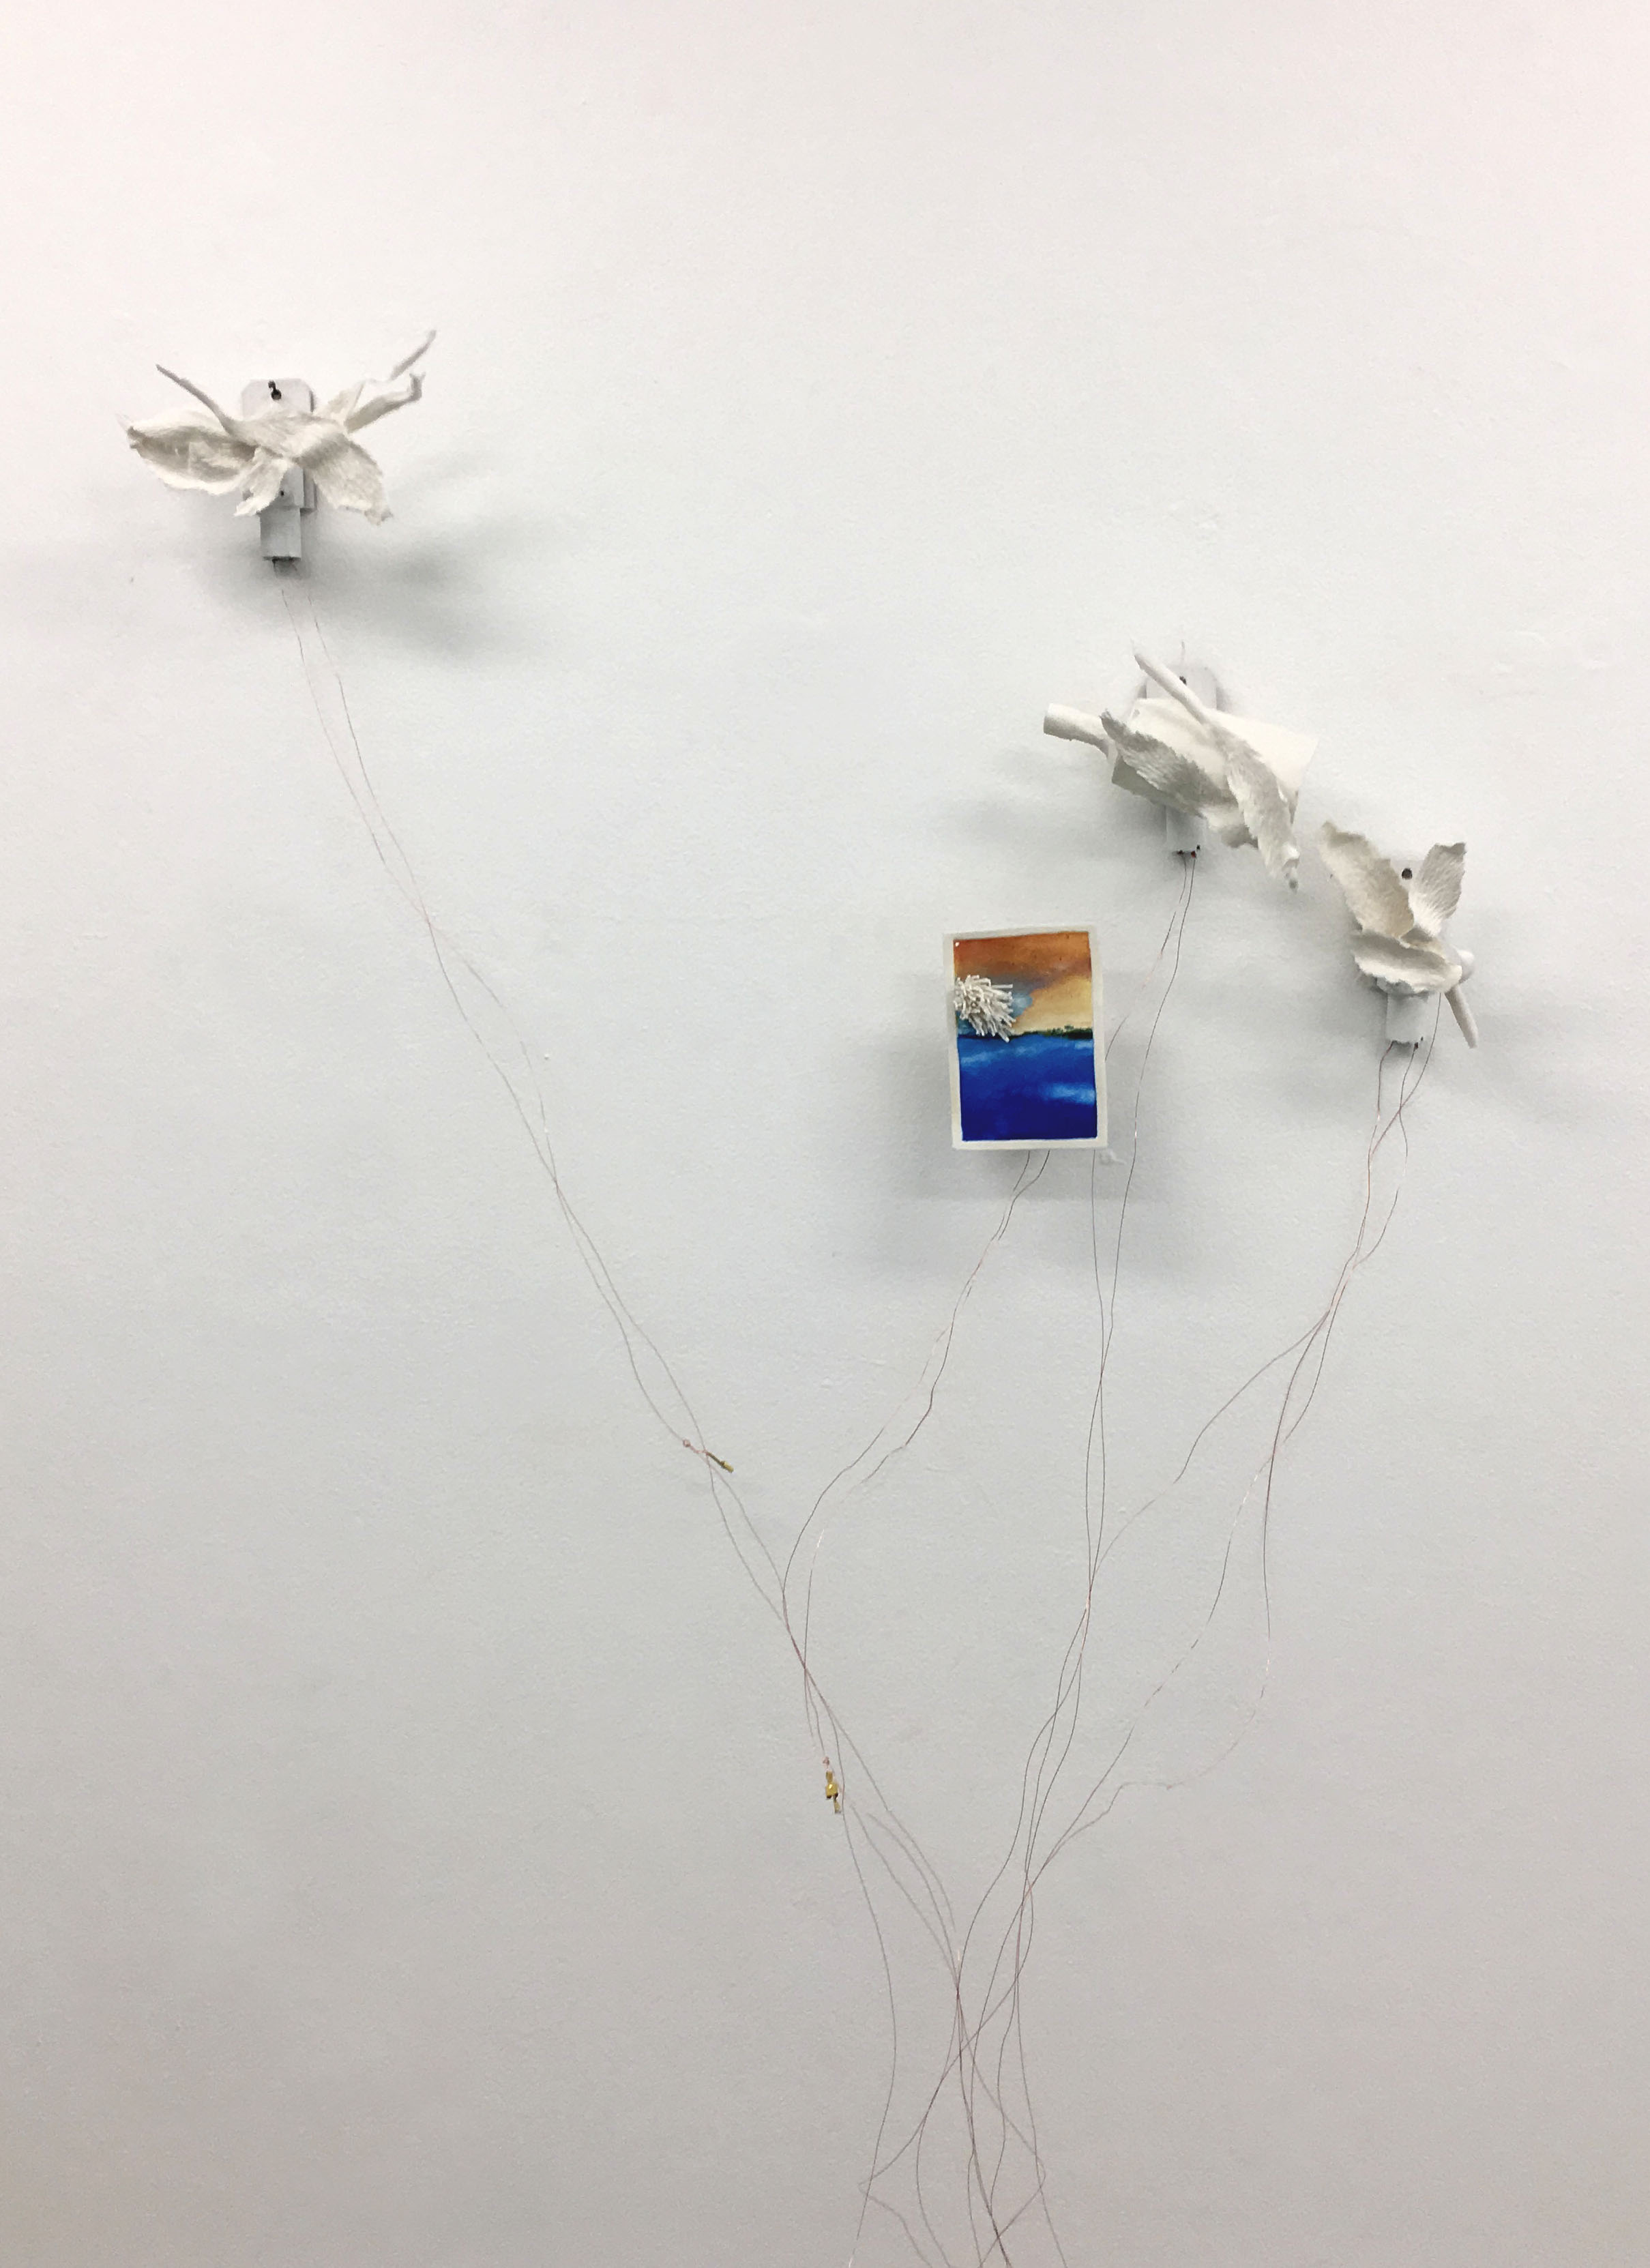  Carol Hudson  Intertidal Wall Machines , 2018. Porcelain, oil on porcelain, motors, copper wire, electrical connectors and 12v battery. Approx 20 x 25 x 10 cm each. 